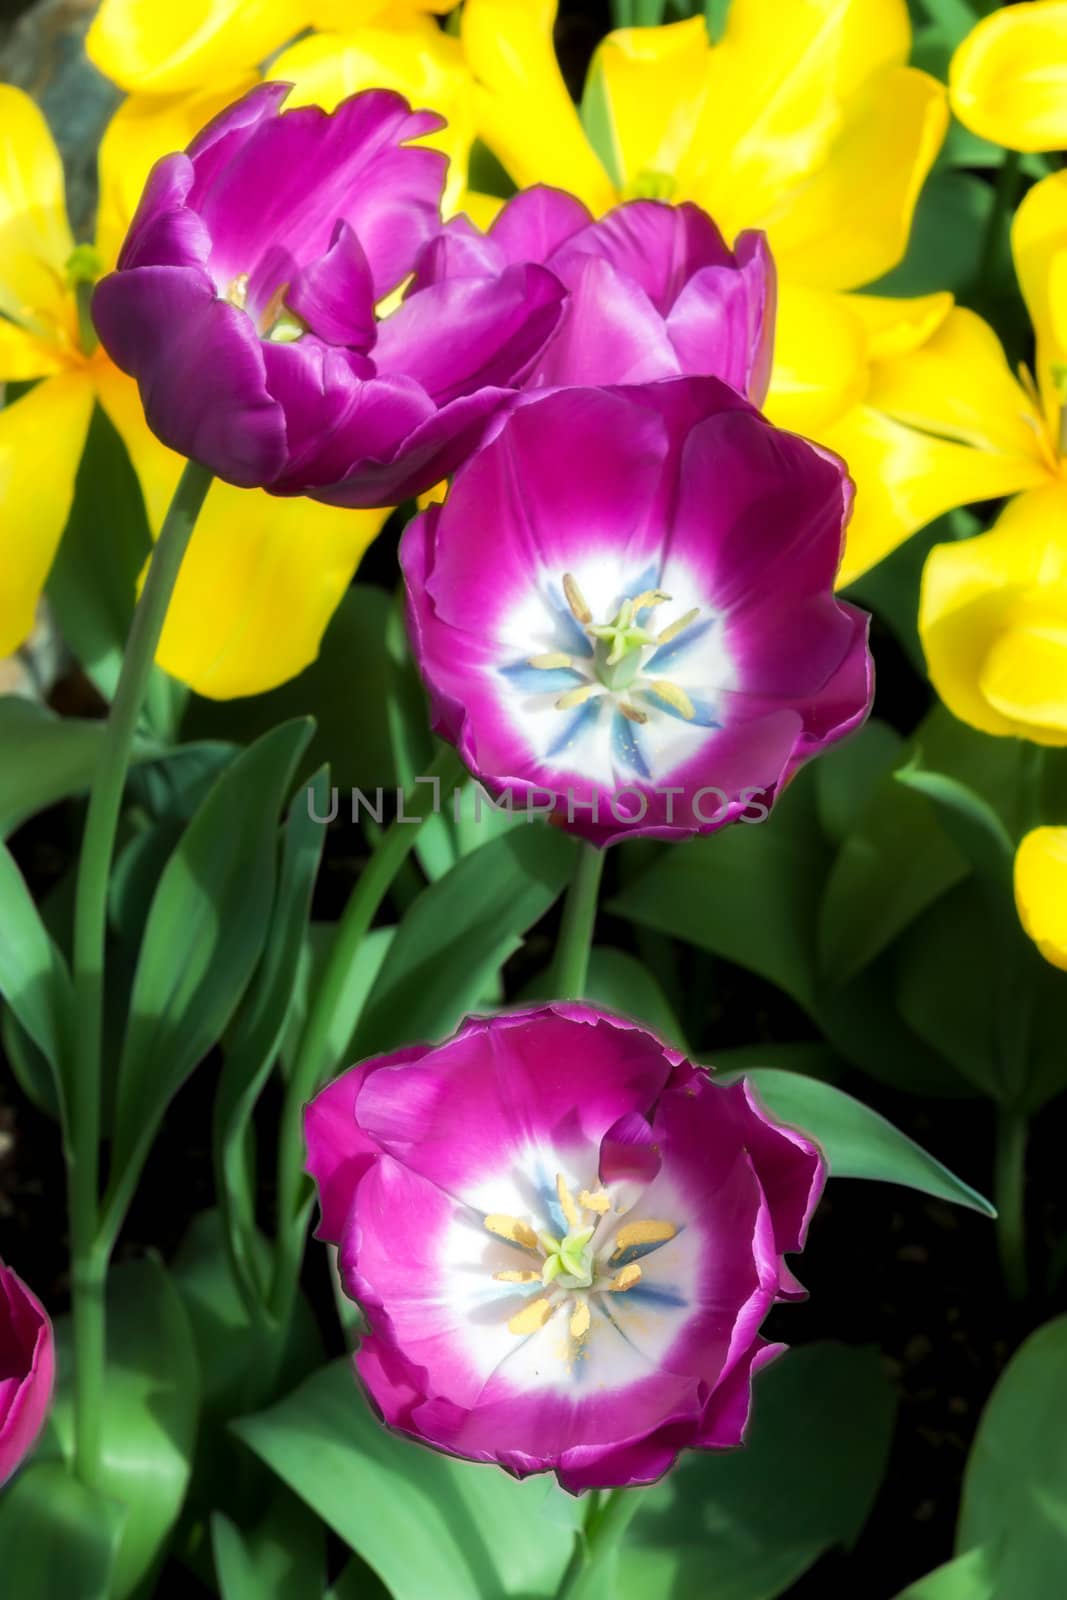 A Grouping of Brilliant Purple Tulips in Spring.